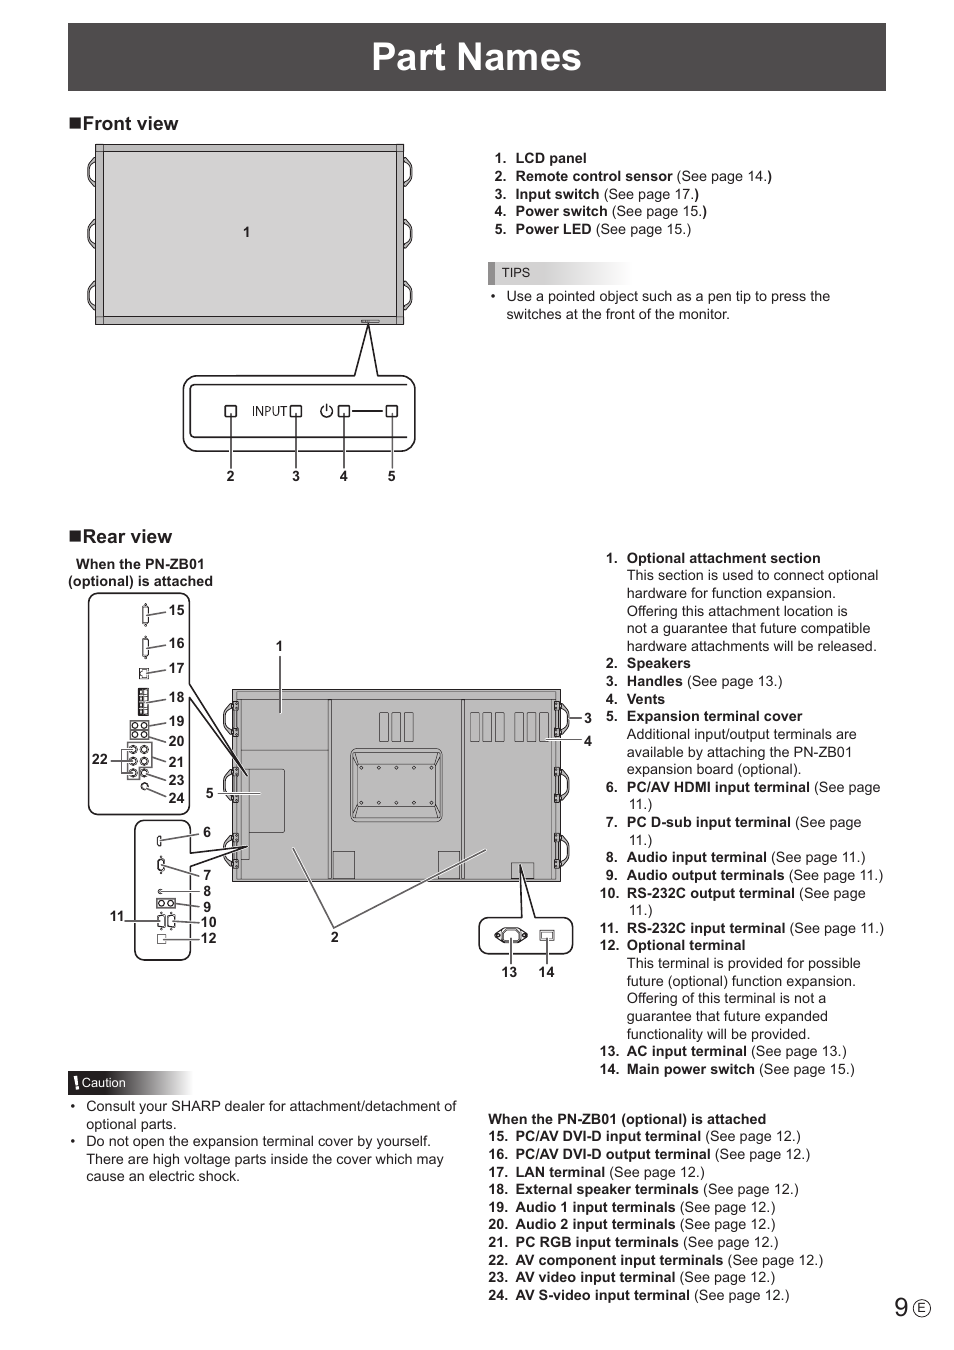 Part names, Nfront view, Nrear view | Sharp PN-E802 User Manual | Page 9 / 56